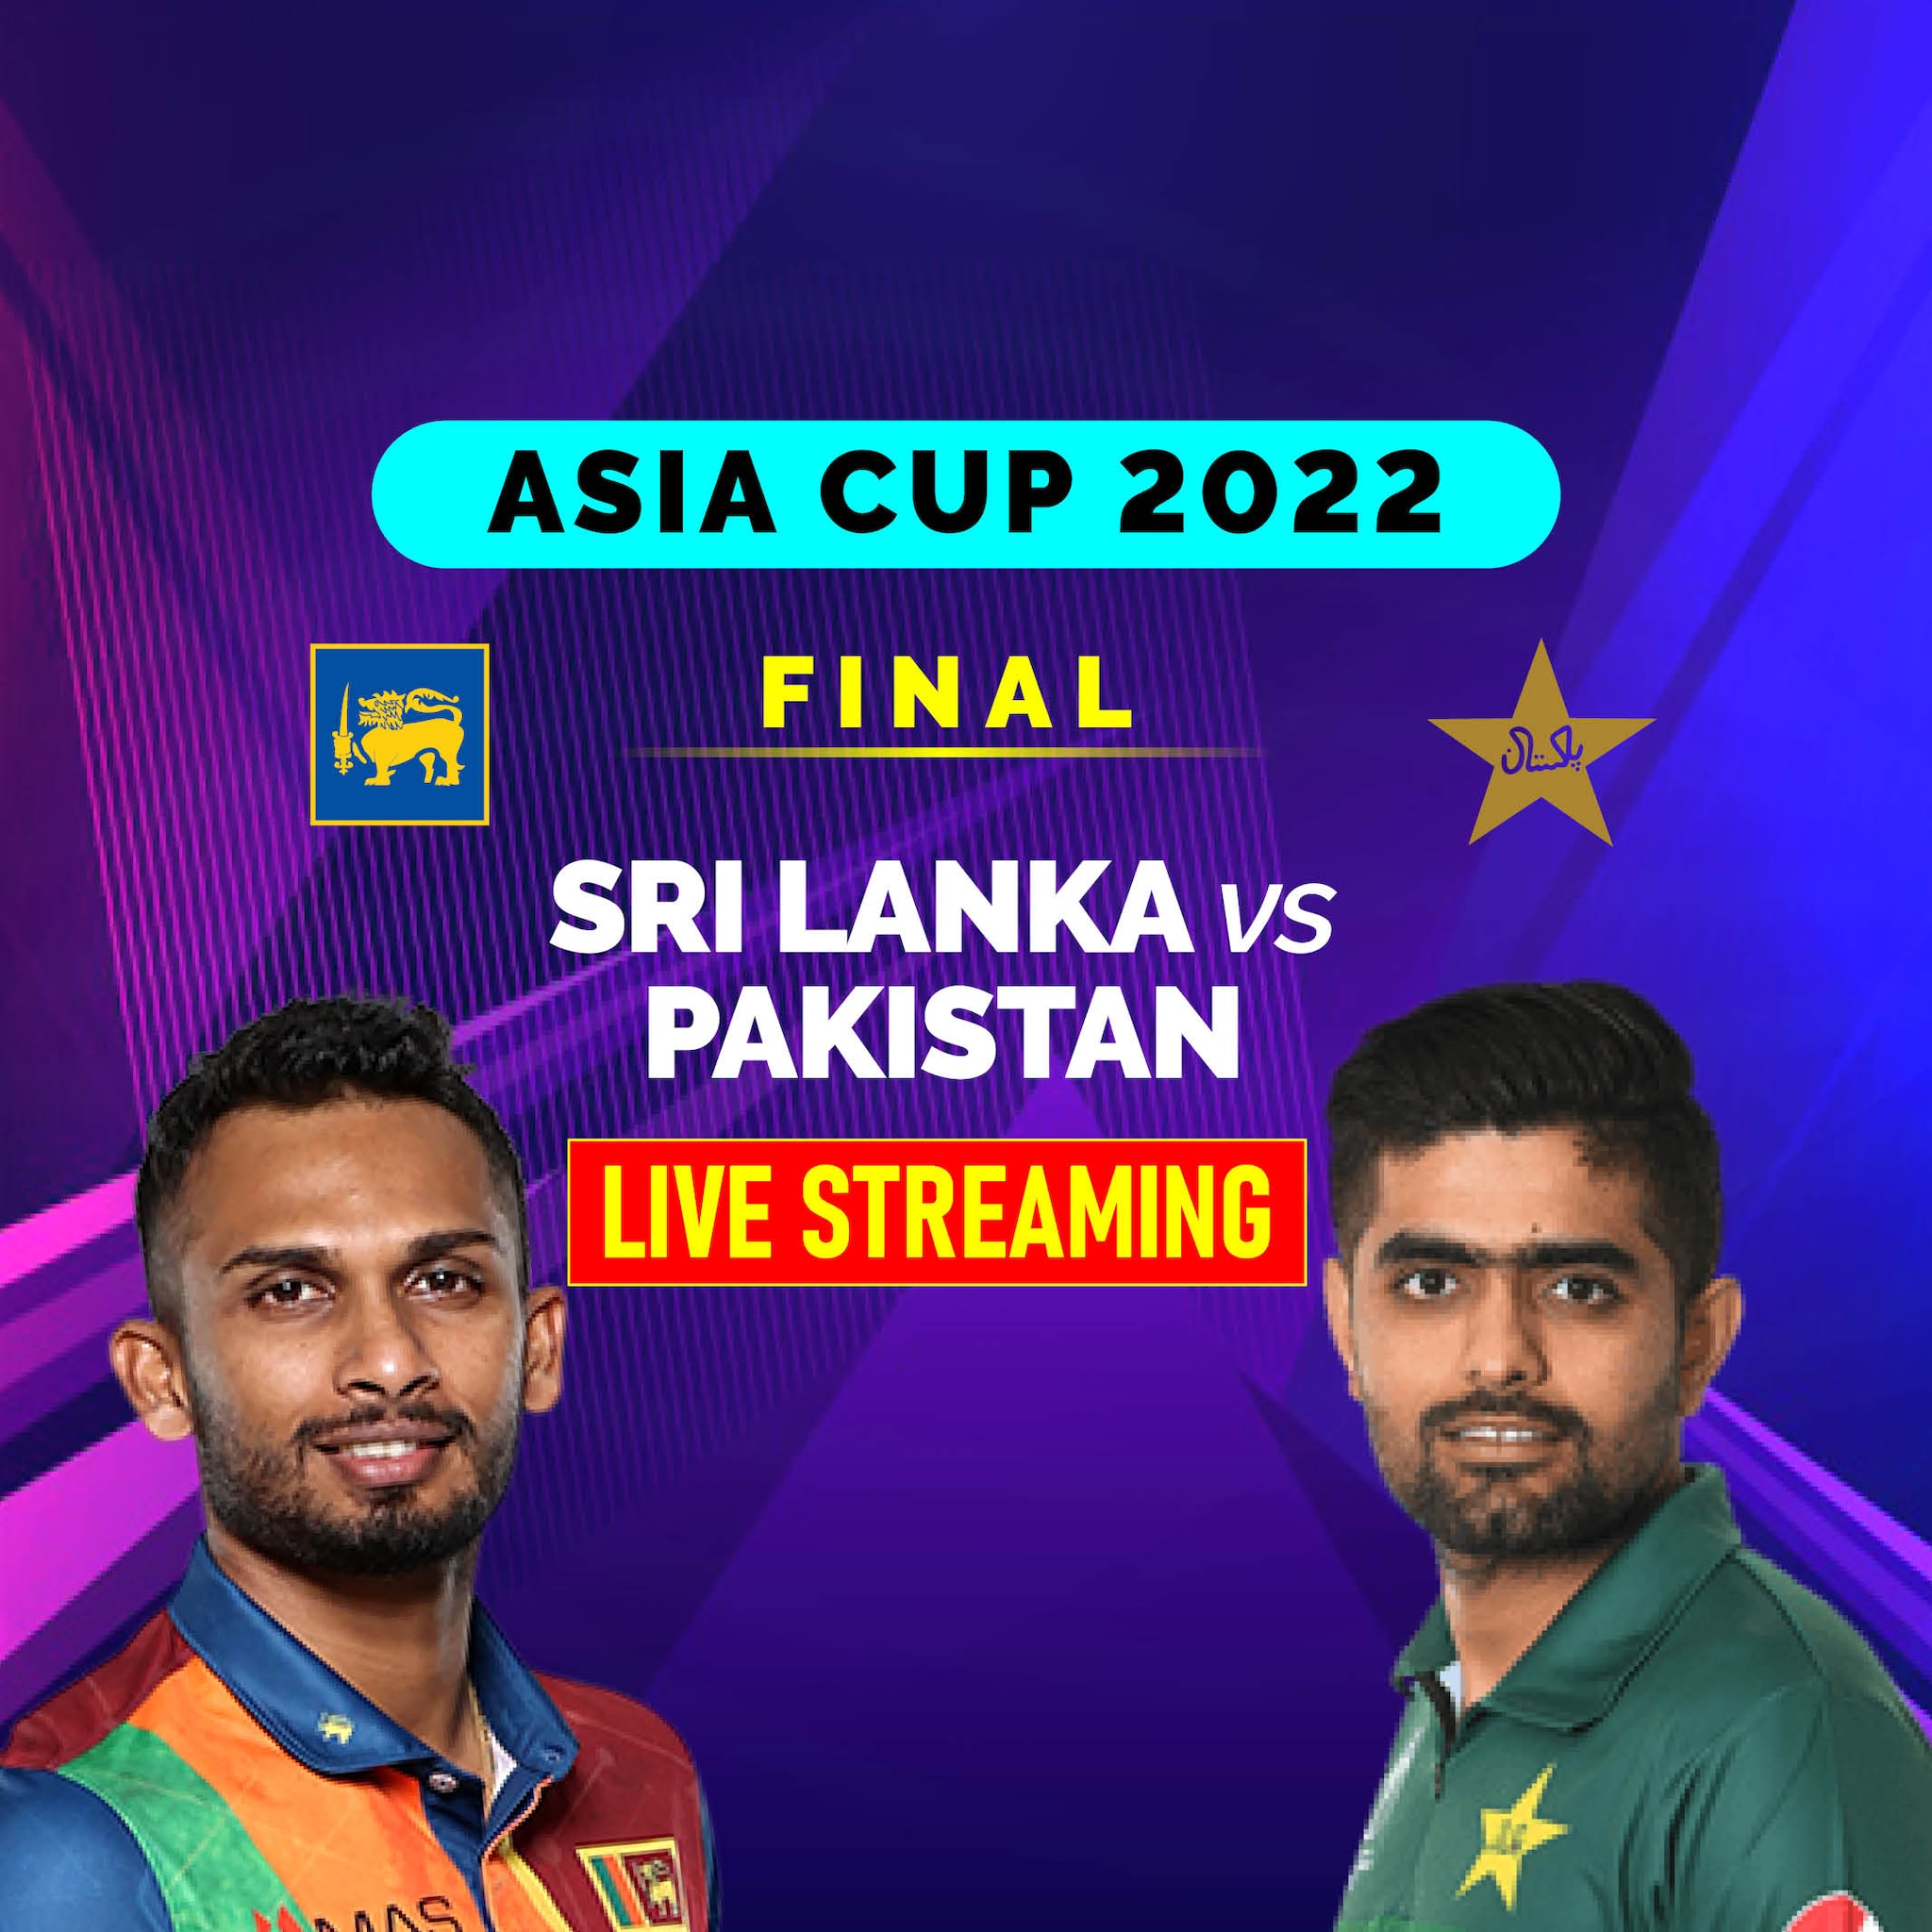 Sri Lanka vs Pakistan Live Cricket Streaming How to Watch Asia Cup 2022 Final Coverage on TV And Online in India